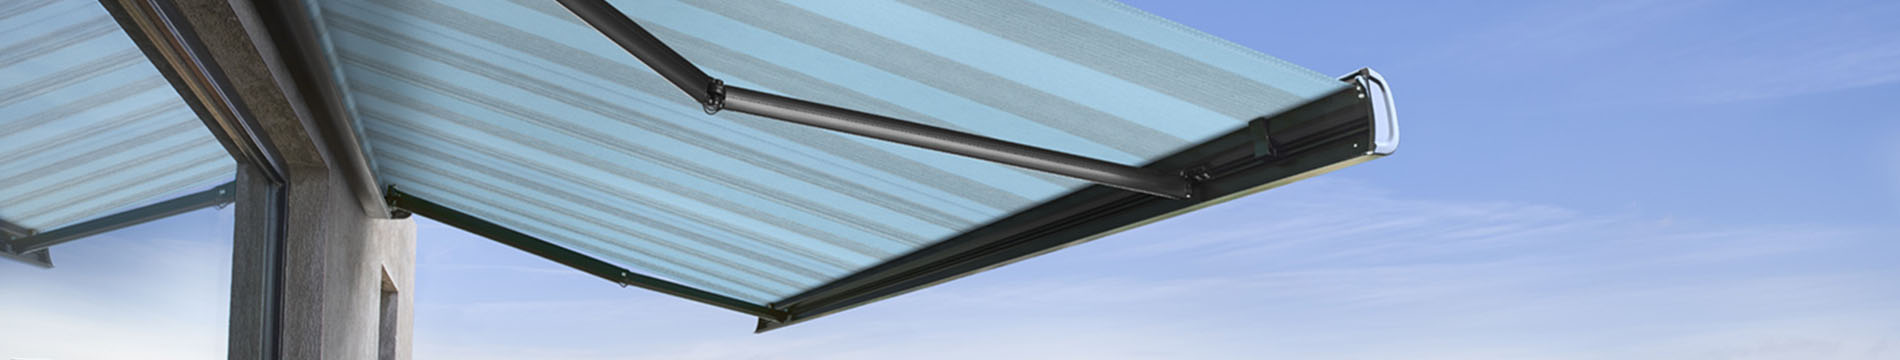 awning fabric.extension